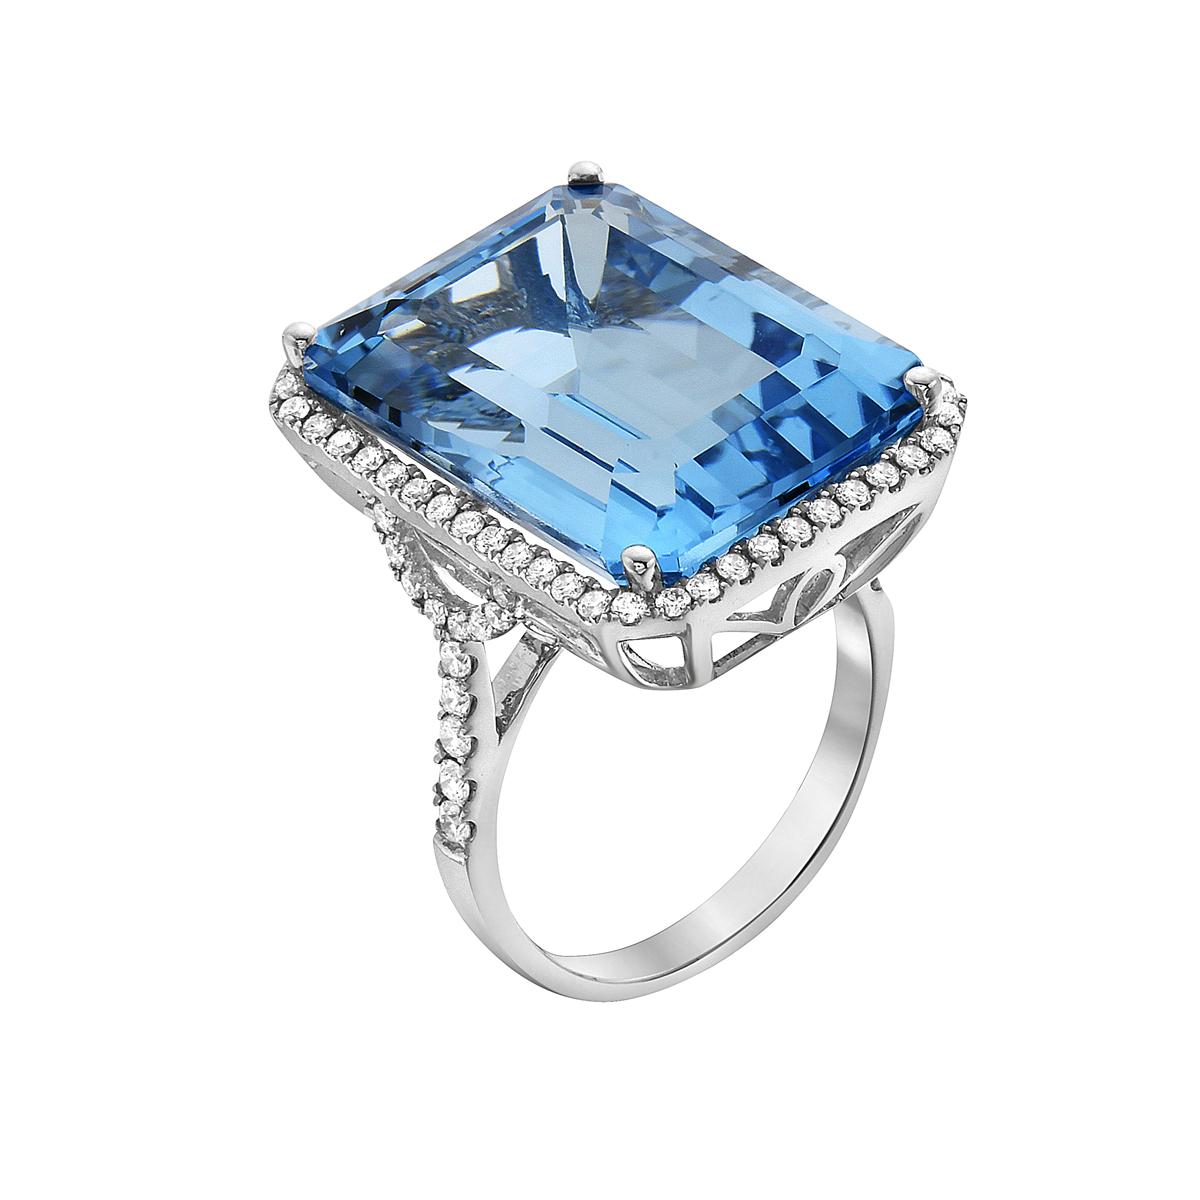 With this exquisite semi-precious blue quartz ring, style and glamour are in the spotlight. This 14-karat emerald cut ring is made from 6.1 grams of gold, 1 blue quartz totaling 27.37 karats, and is surrounded by 76 round SI1-SI2, GH color diamonds